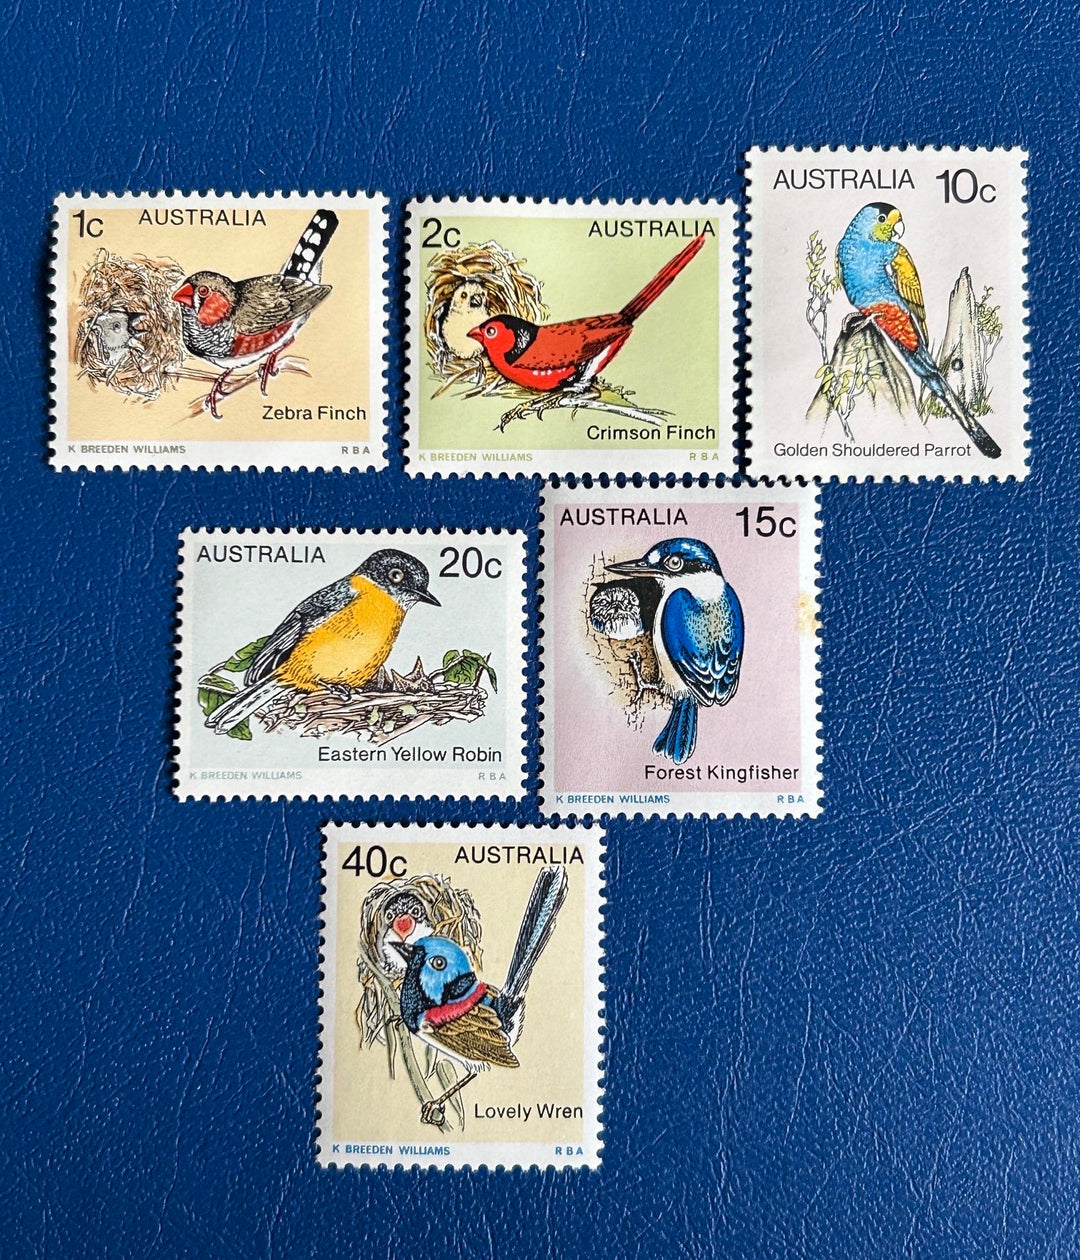 Australia - Original Vintage Postage Stamps - 1979 - Birds: Series One - for the collector, artist or crafter